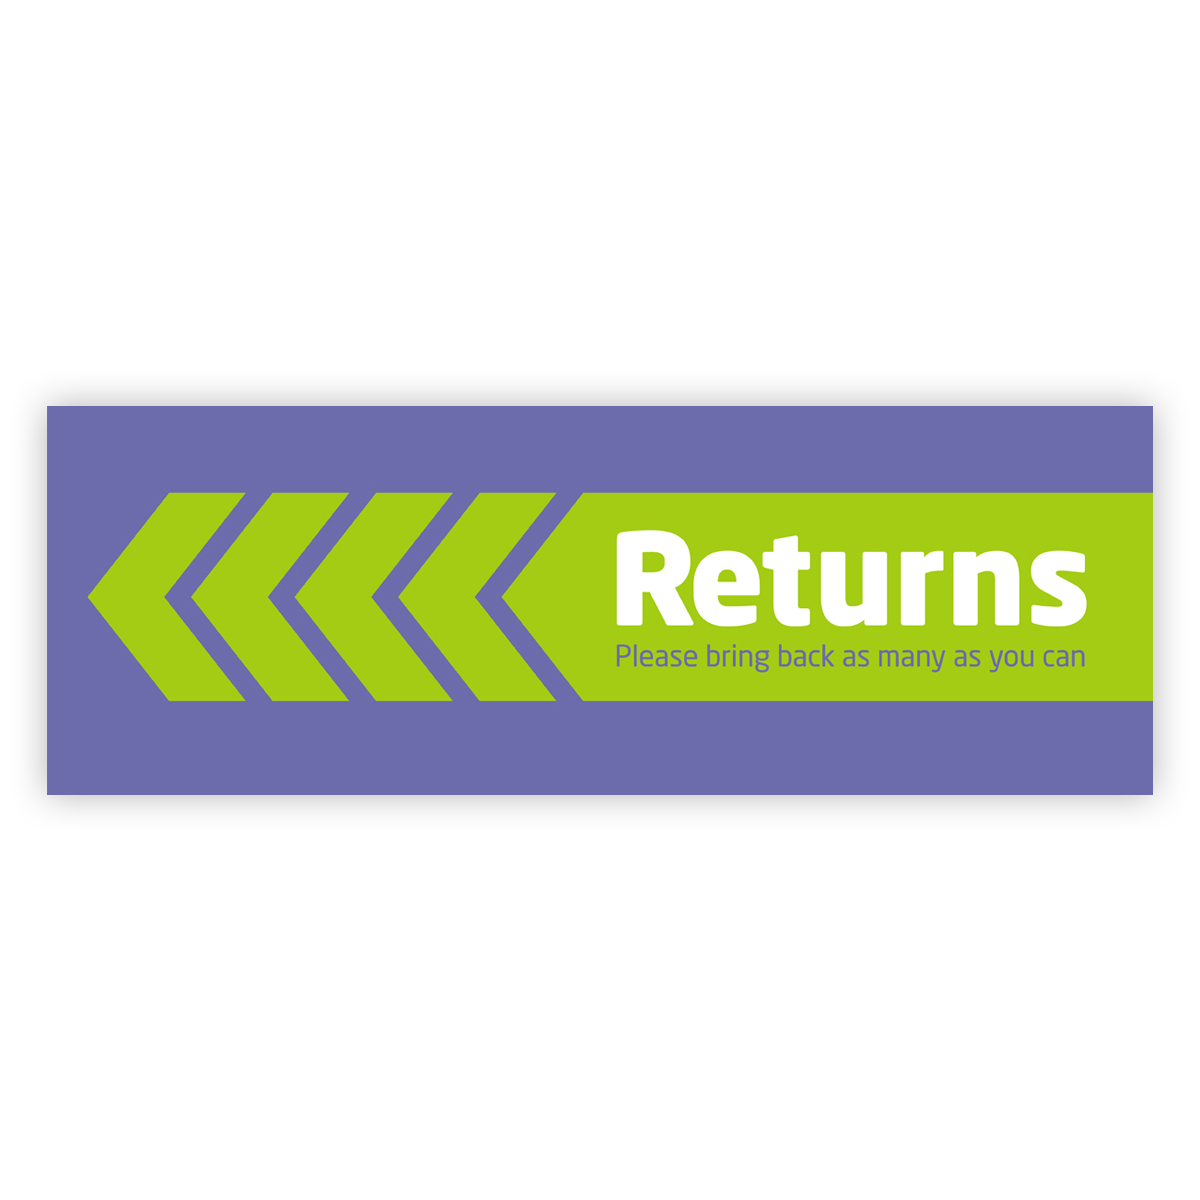 Poster - Returns: please bring back as many as you can